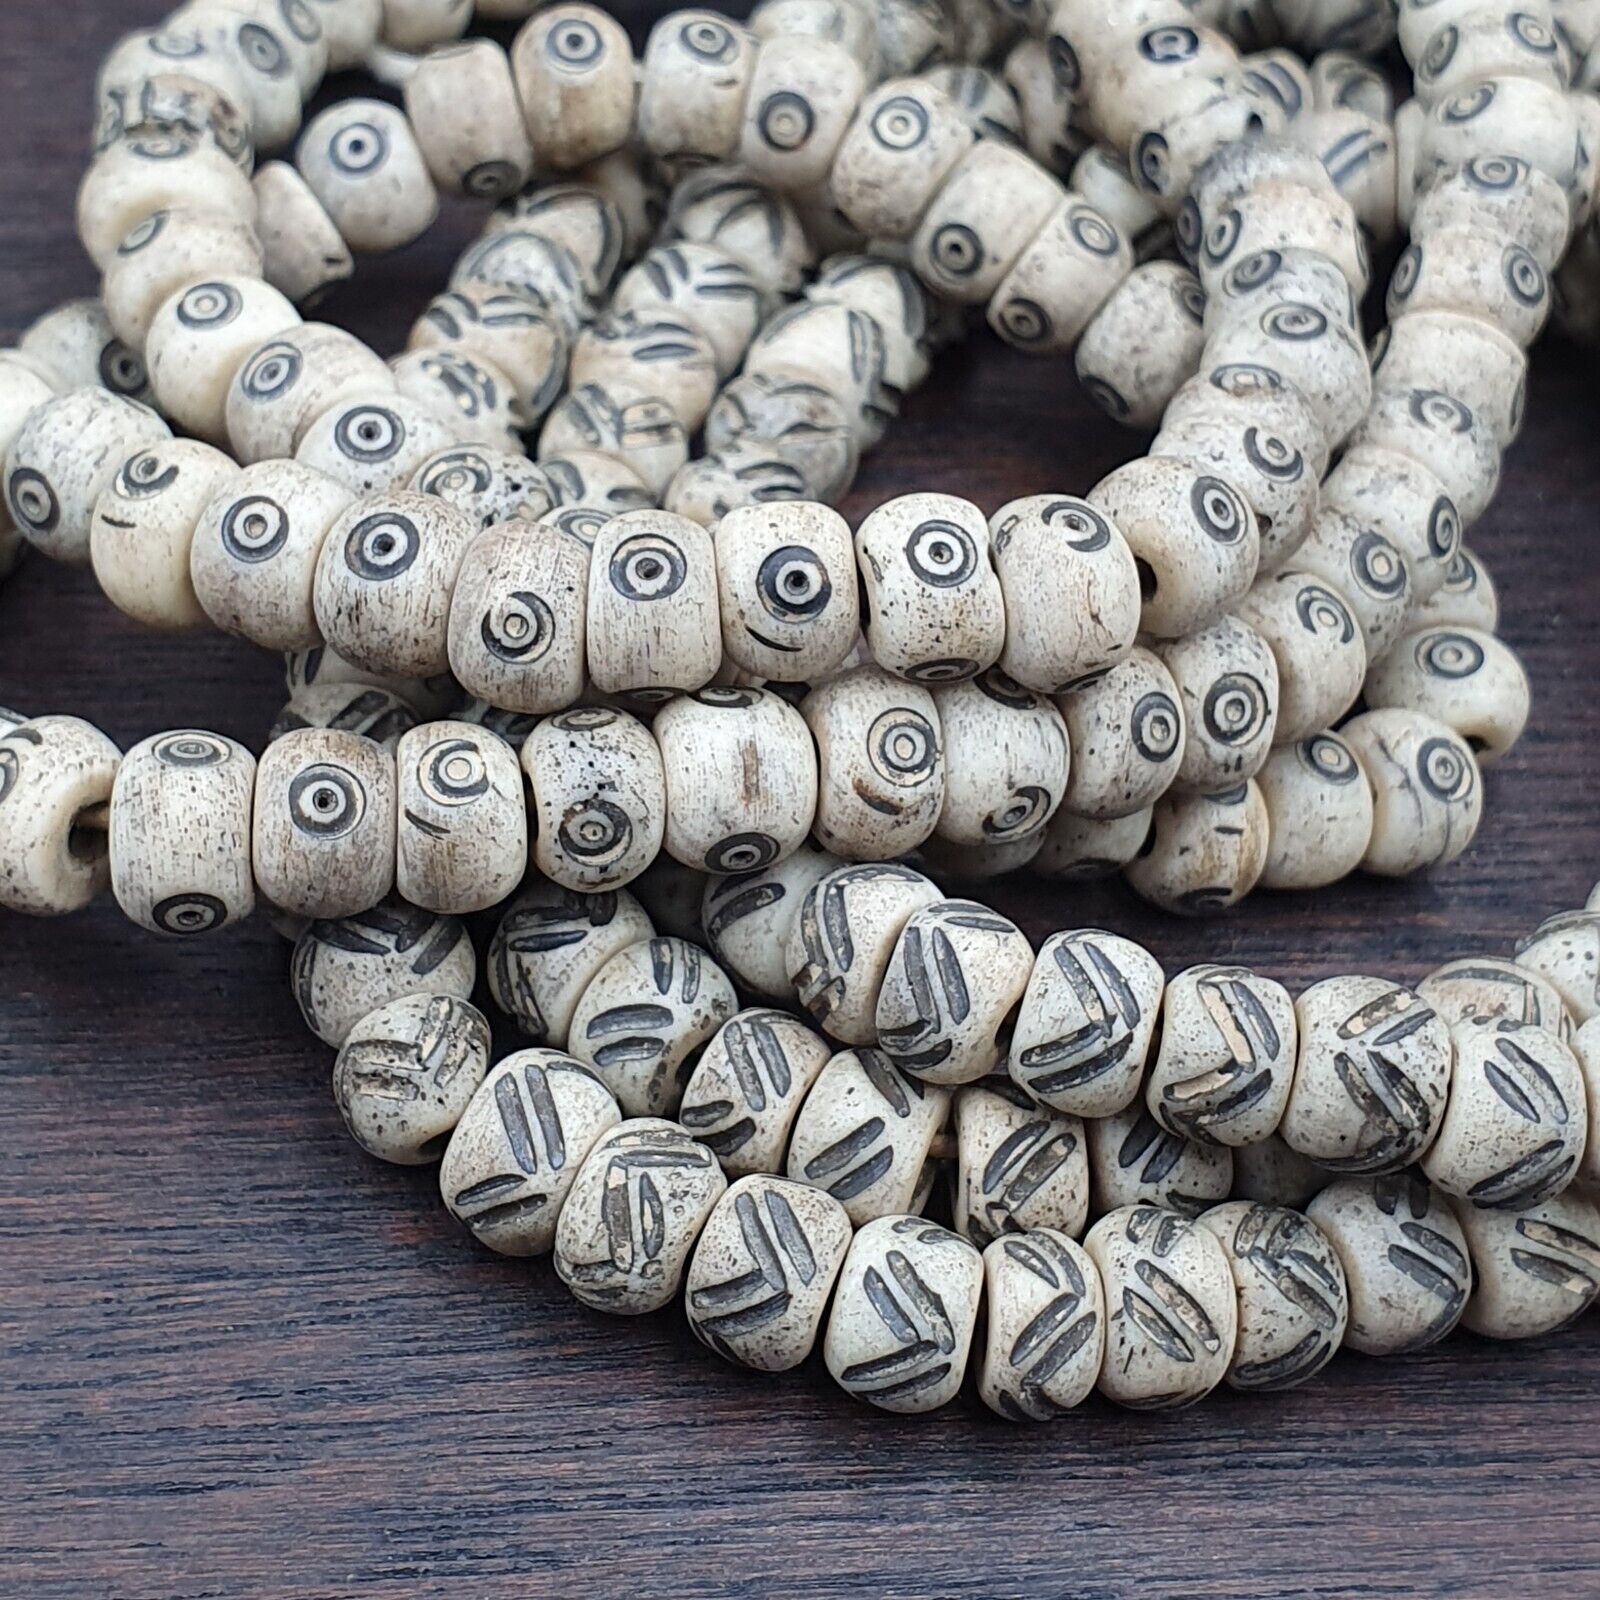 "Two vintage Tibetan-Chinese carved necklace strands, featuring intricately decorated beads with tribal designs. These unique and rare beads showcase exceptional craftsmanship and cultural heritage, making them a valuable addition to any jewelry collection or cultural artifact display."